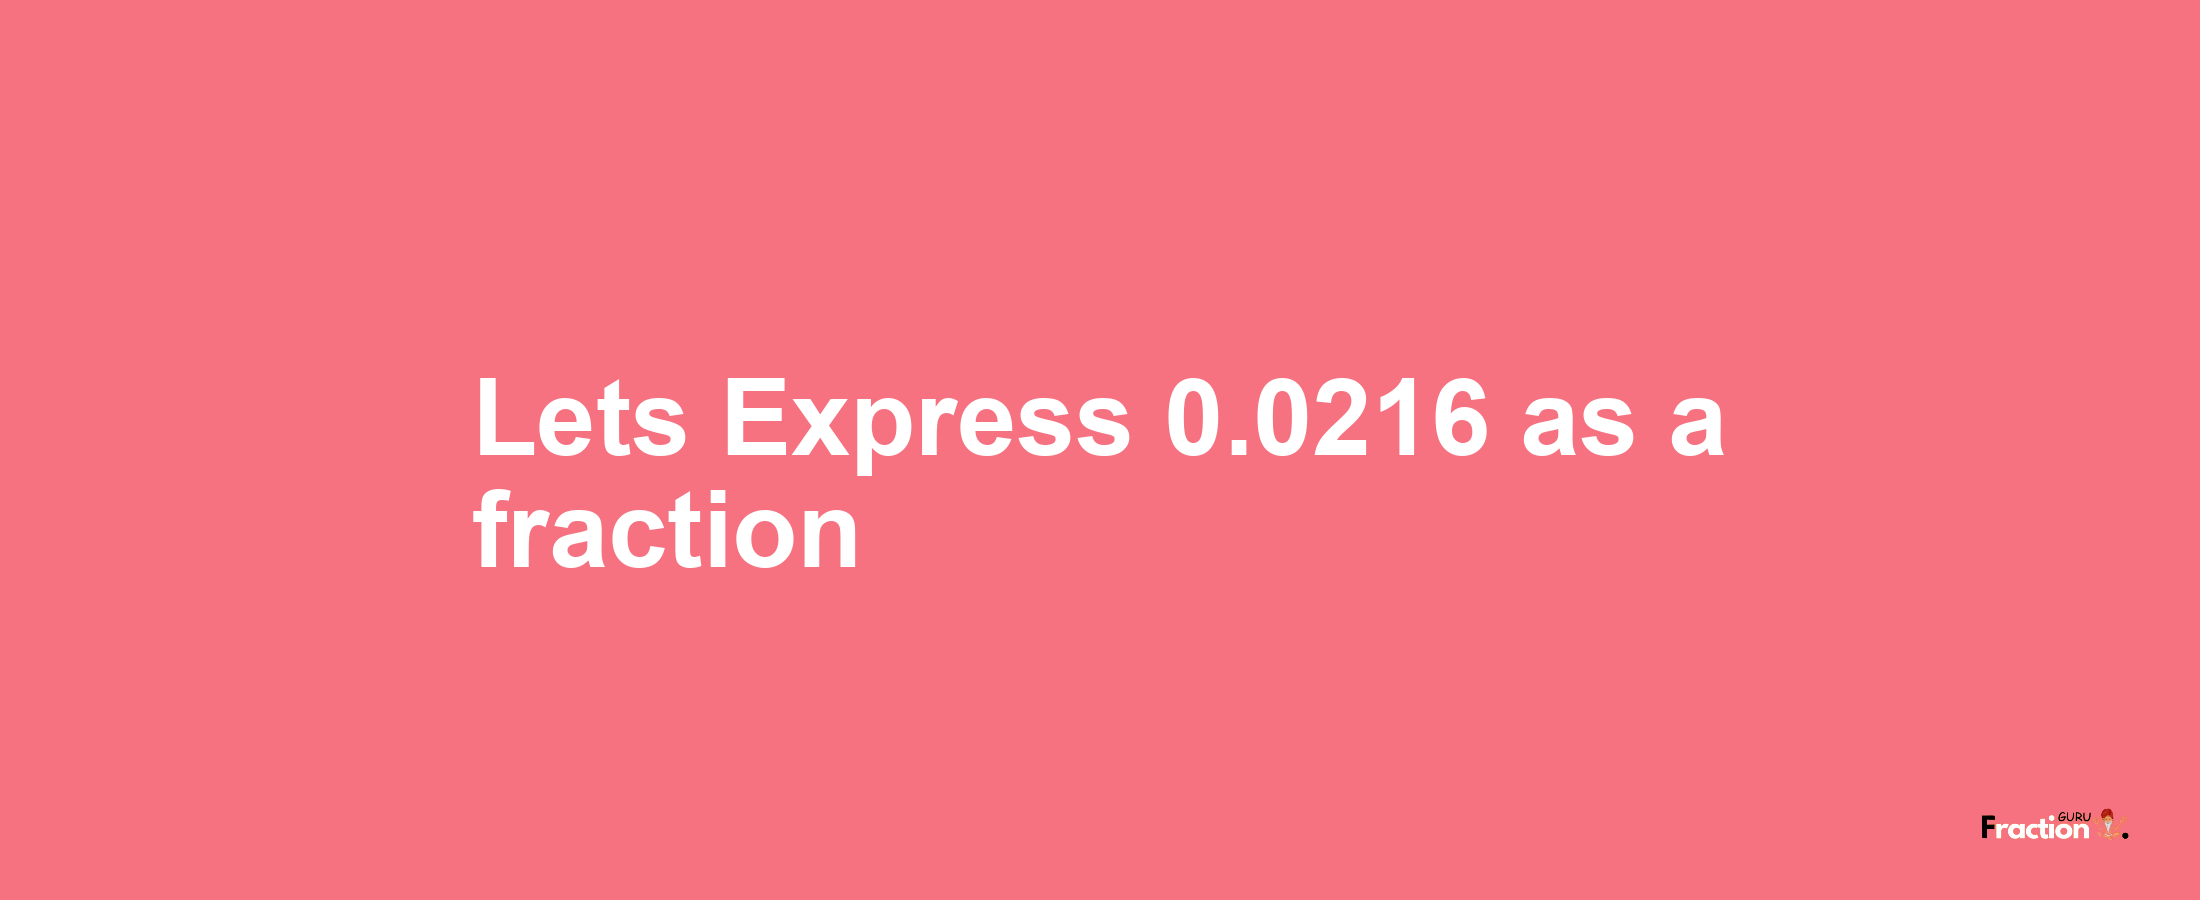 Lets Express 0.0216 as afraction